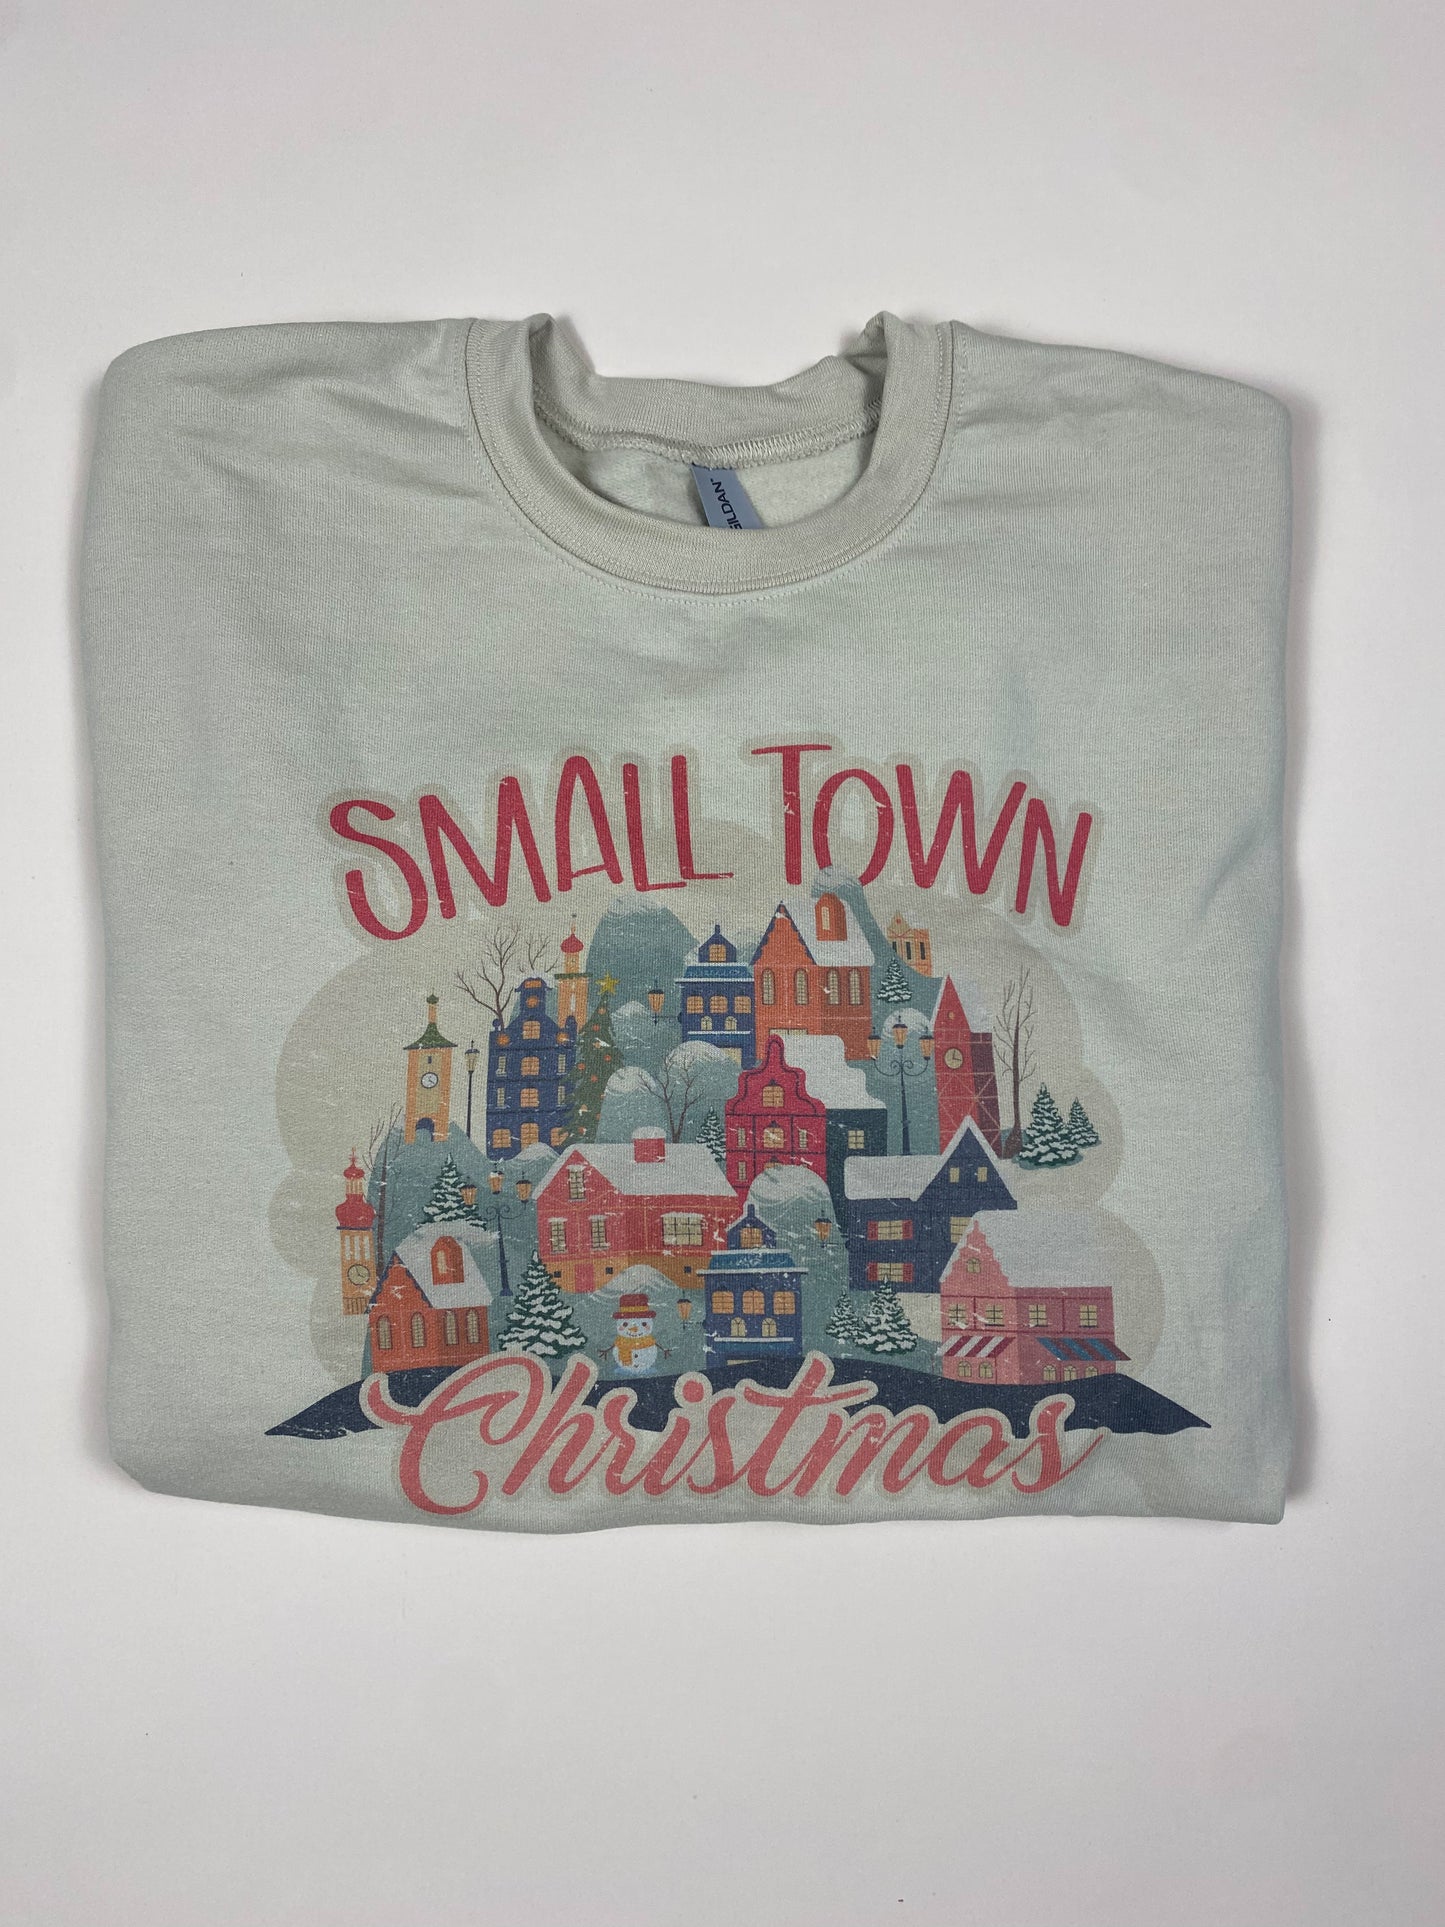 Small Town Christmas Sweater